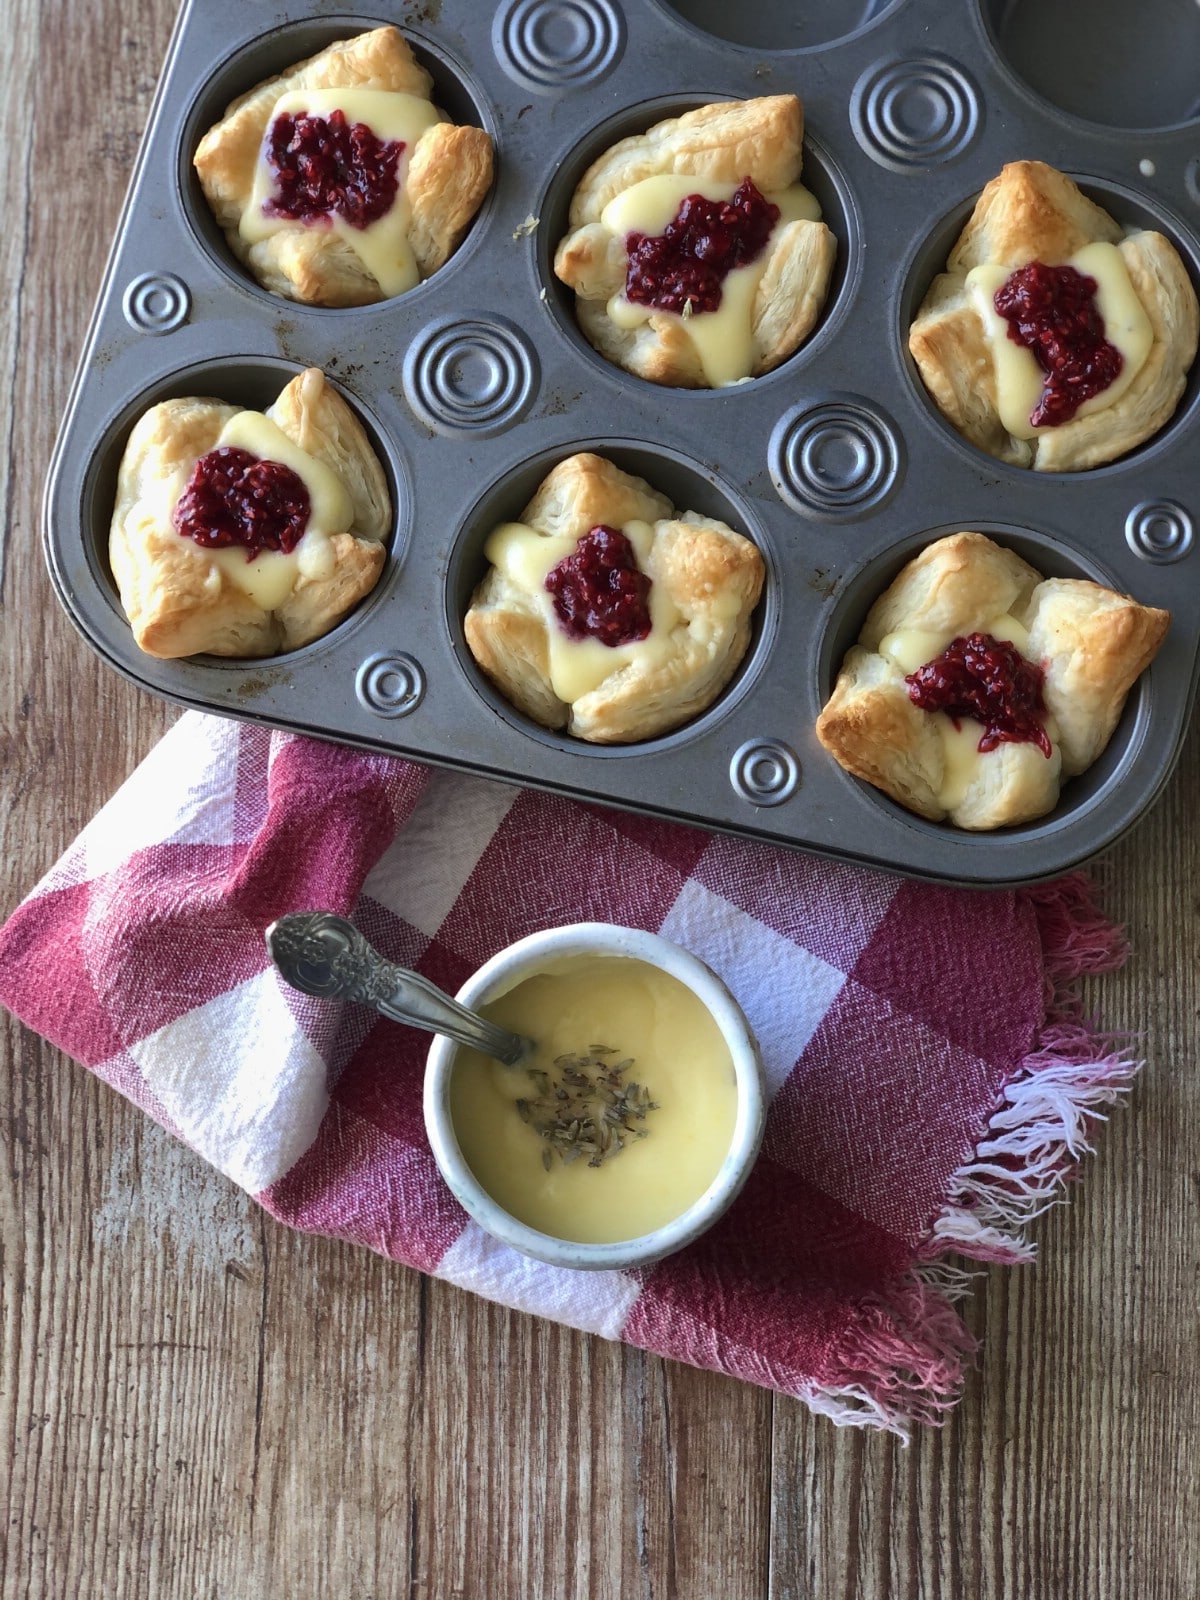 Tarts in muffin tin with sauce on the side